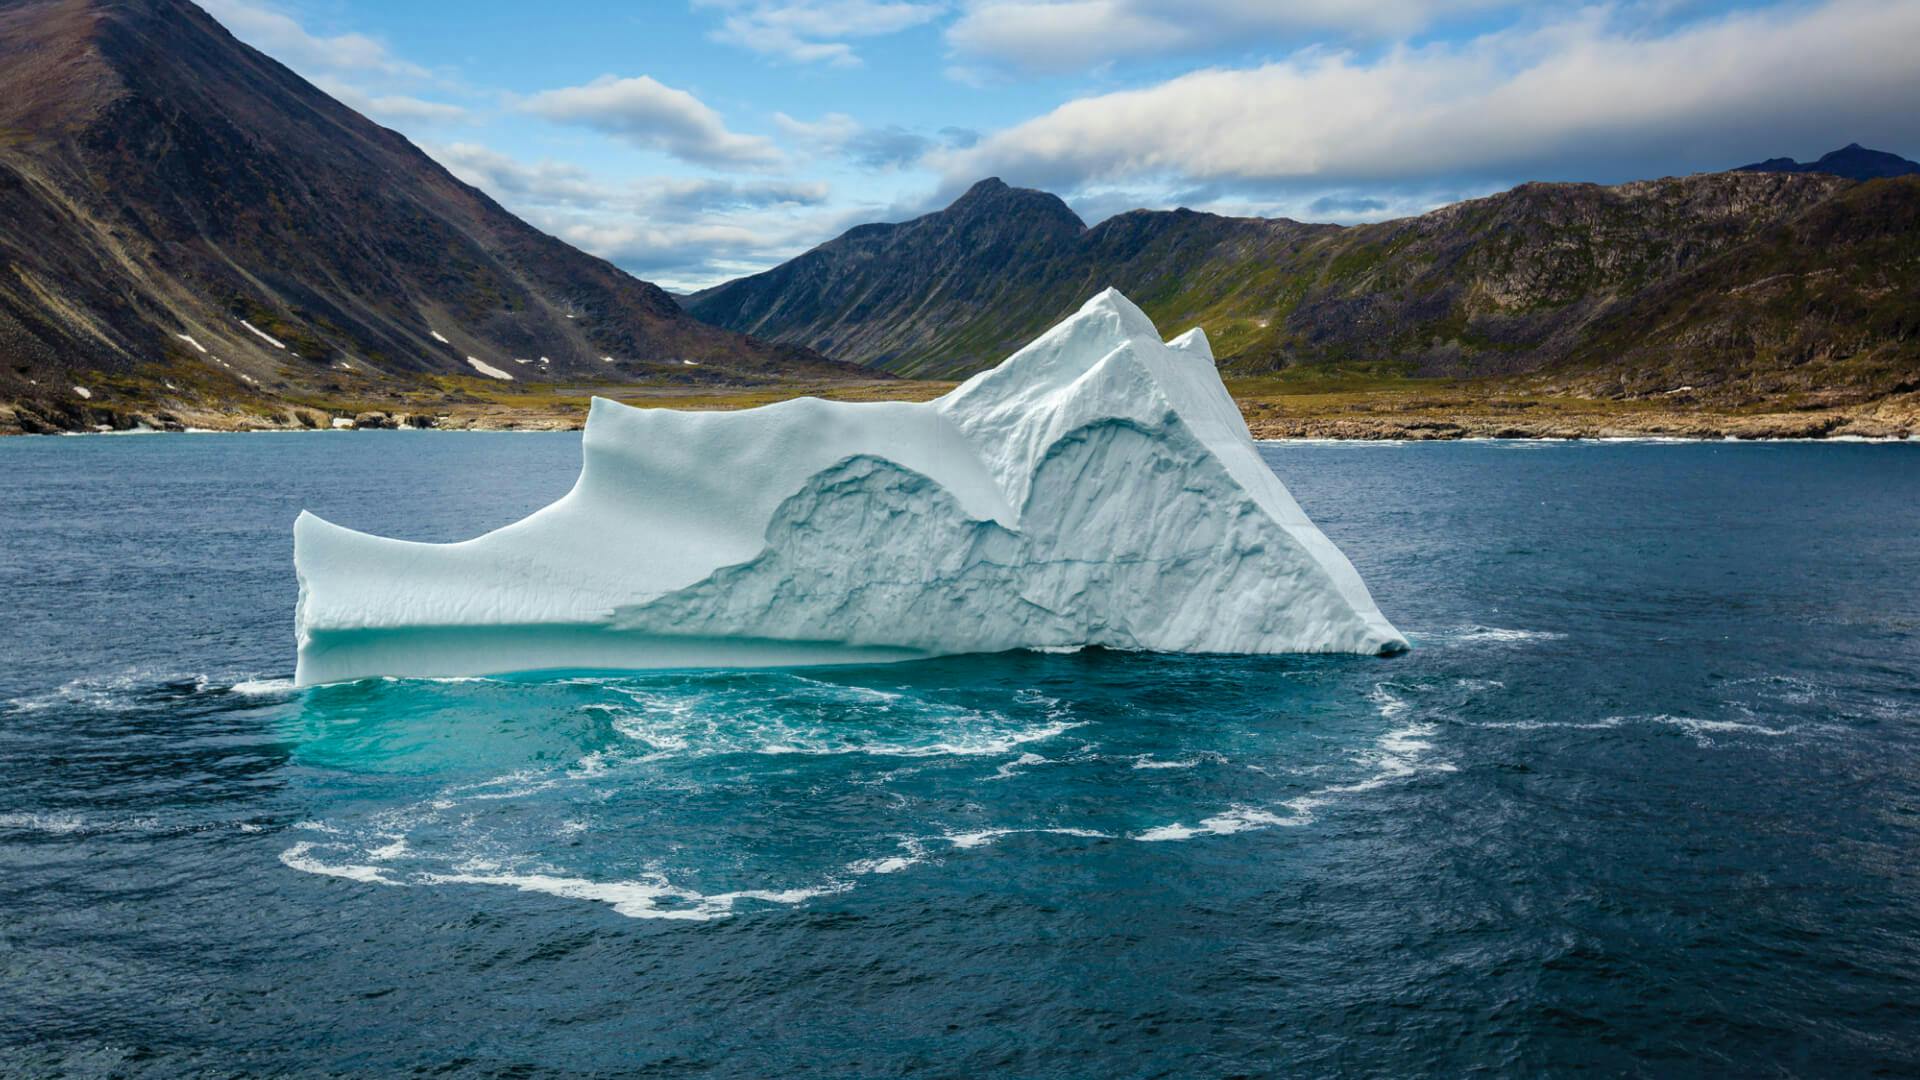 A massive iceberg is floating by an ancient mountain range.